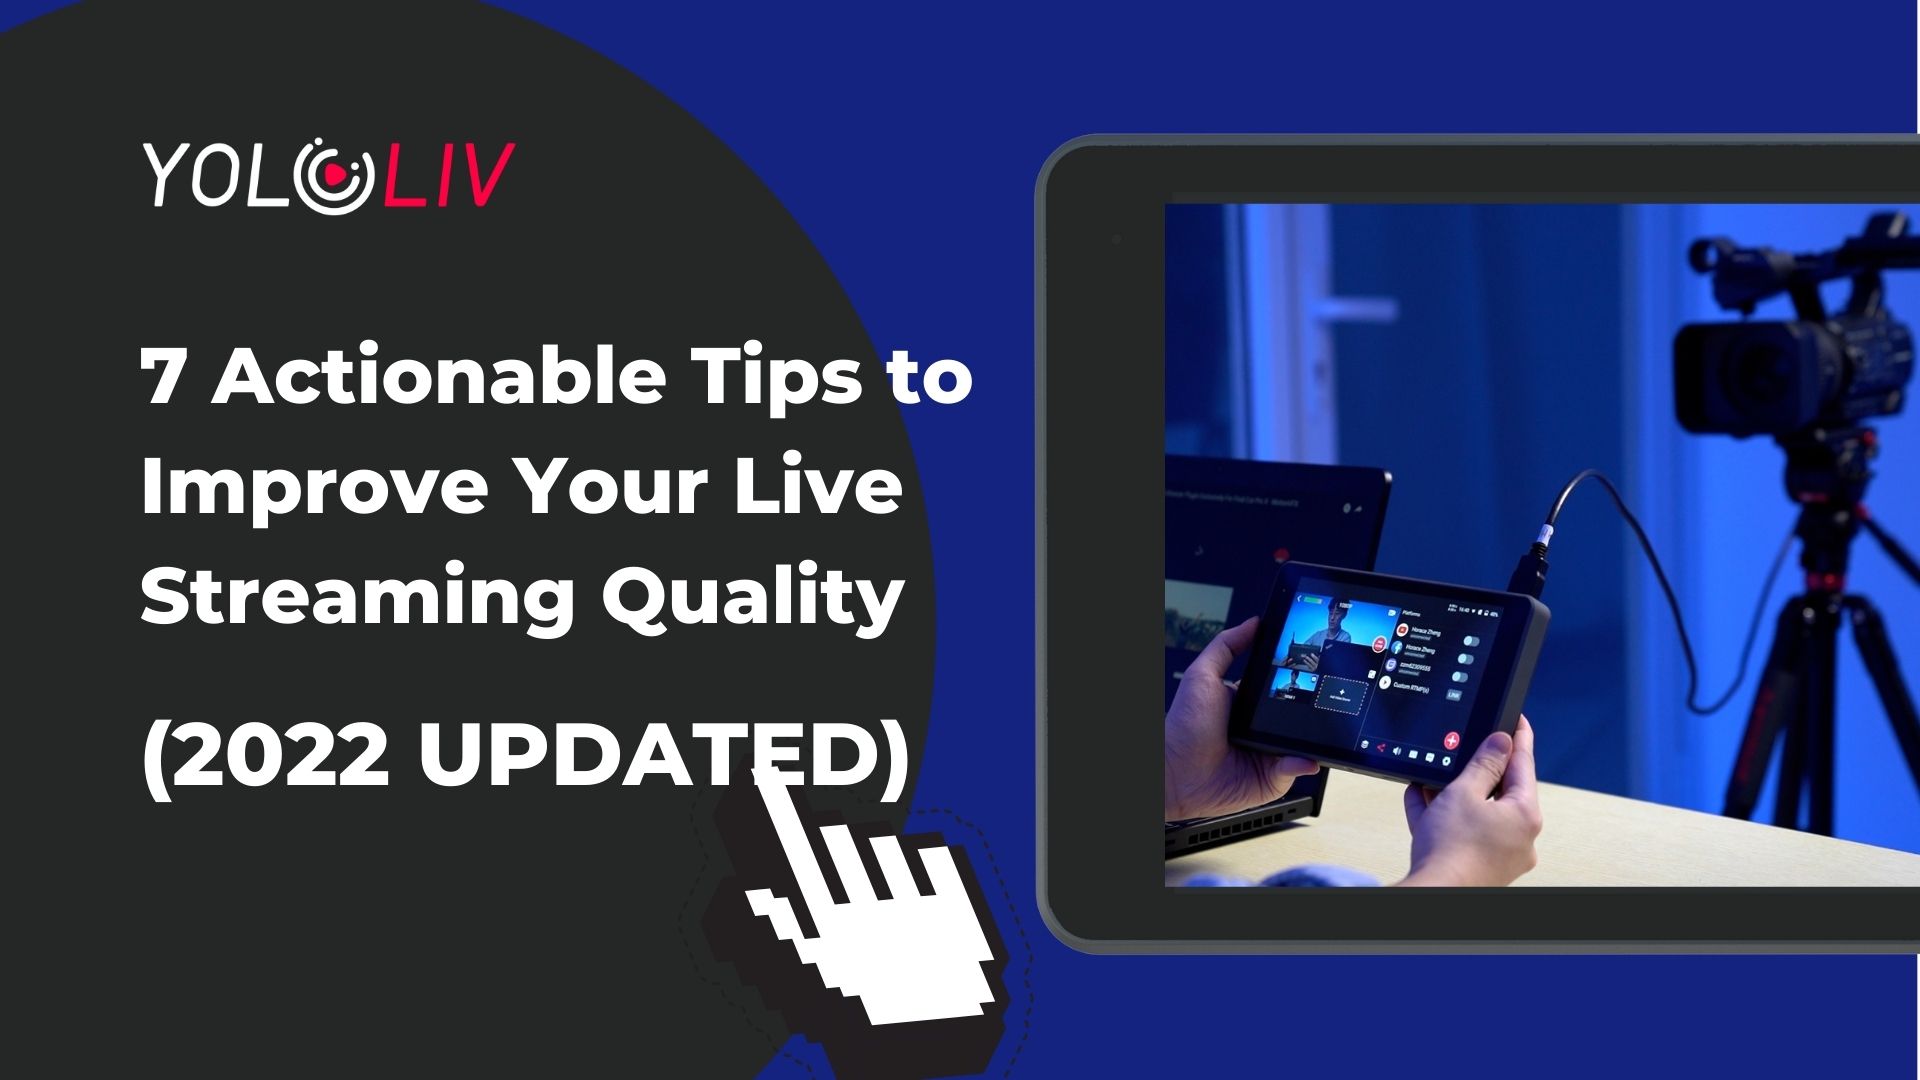 7 Actionable Tips to Improve Your Live Streaming Quality (2022 Updated) -